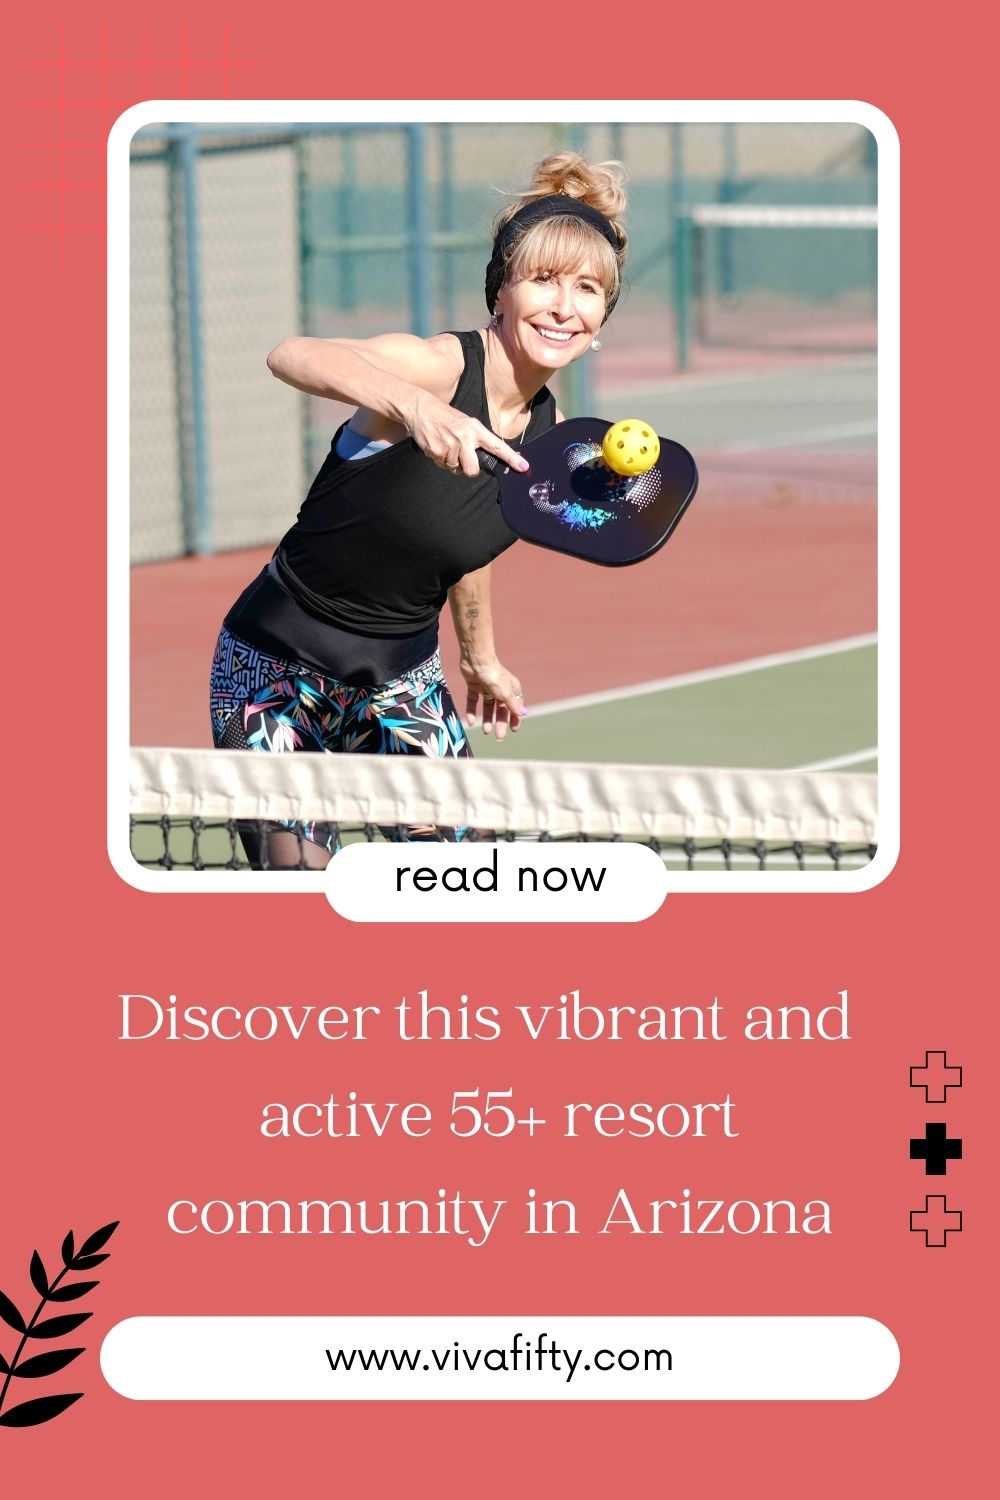 #ad Discover with us this active and vibrant 55+ resort community in Arizona and find out how you can book your own stay.